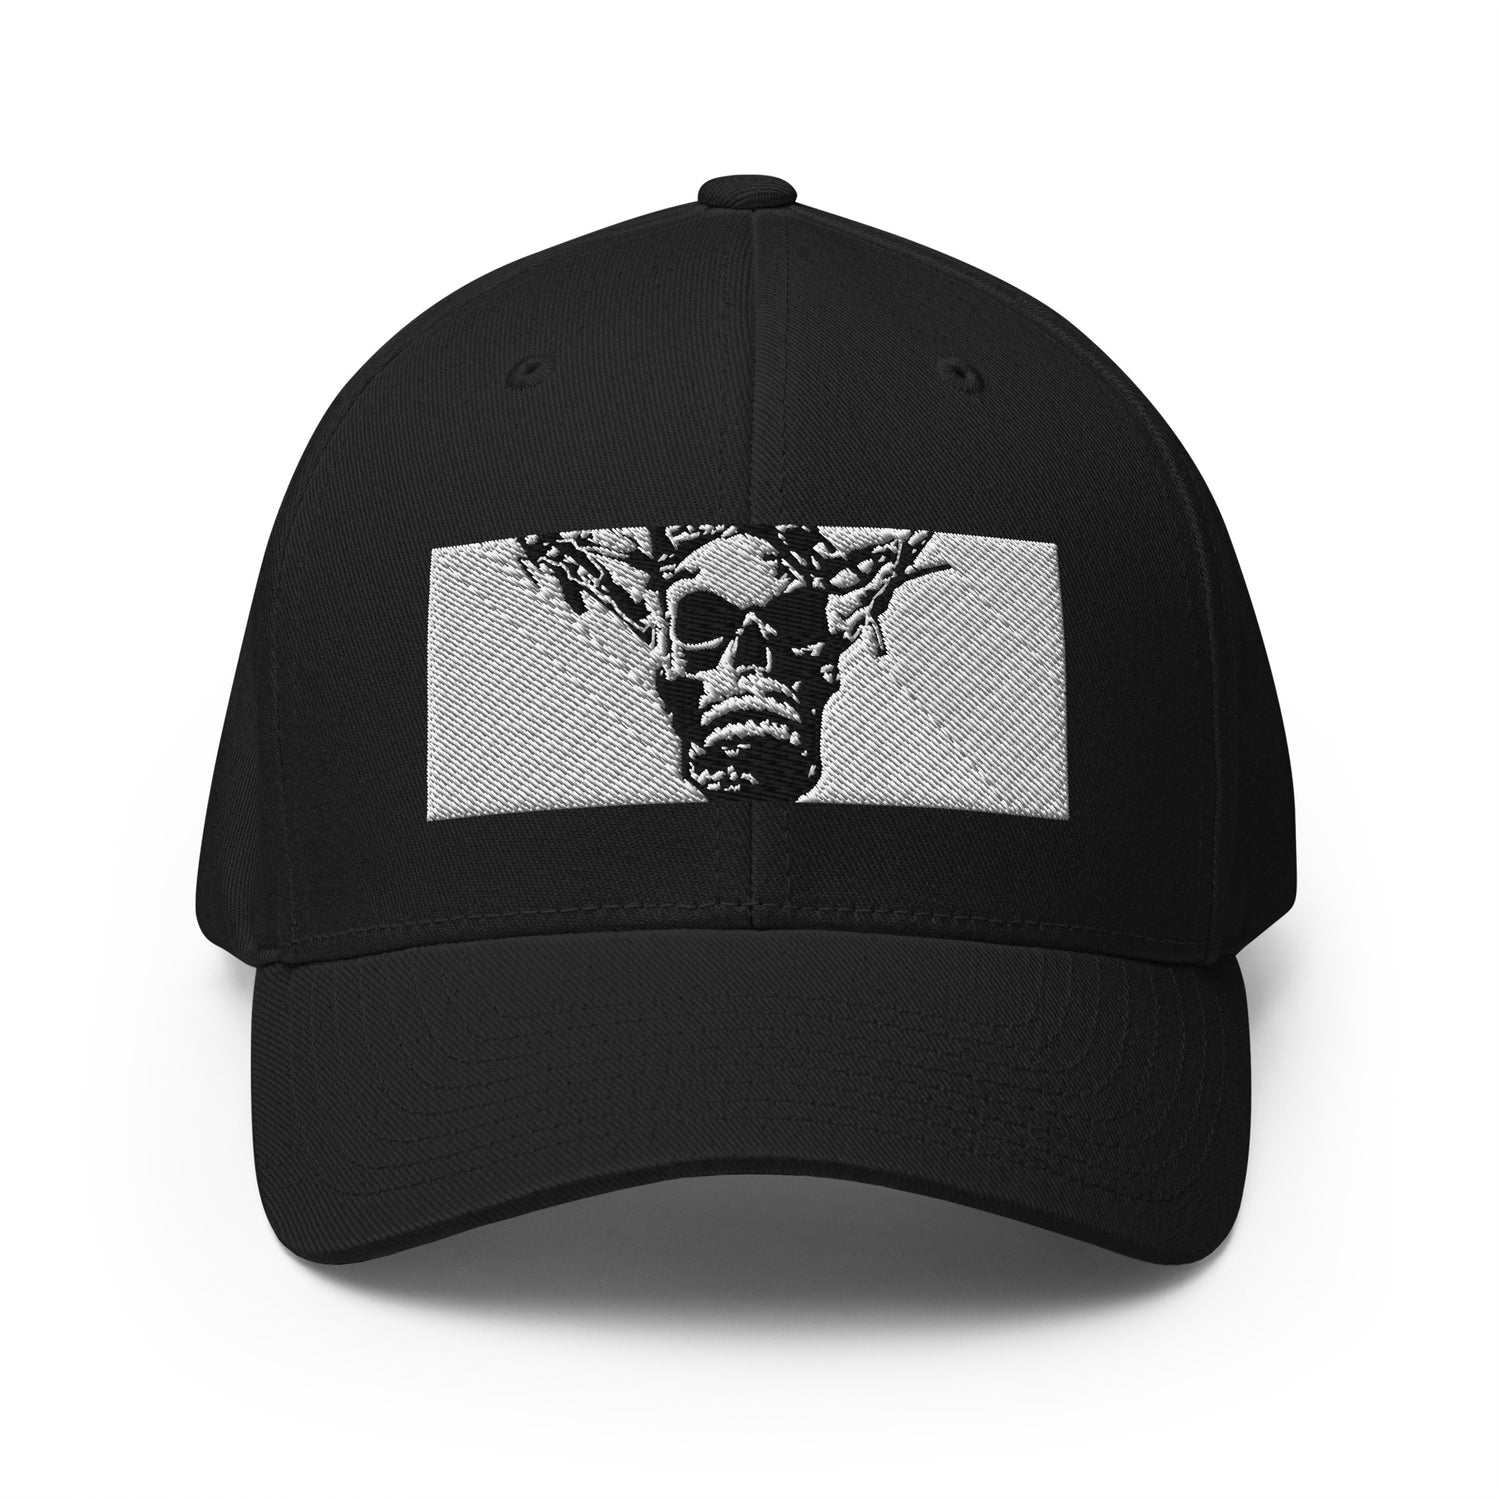 Skull Warrior Stare (Black & White) - Closed Back Structured Hat - Fry1Productions